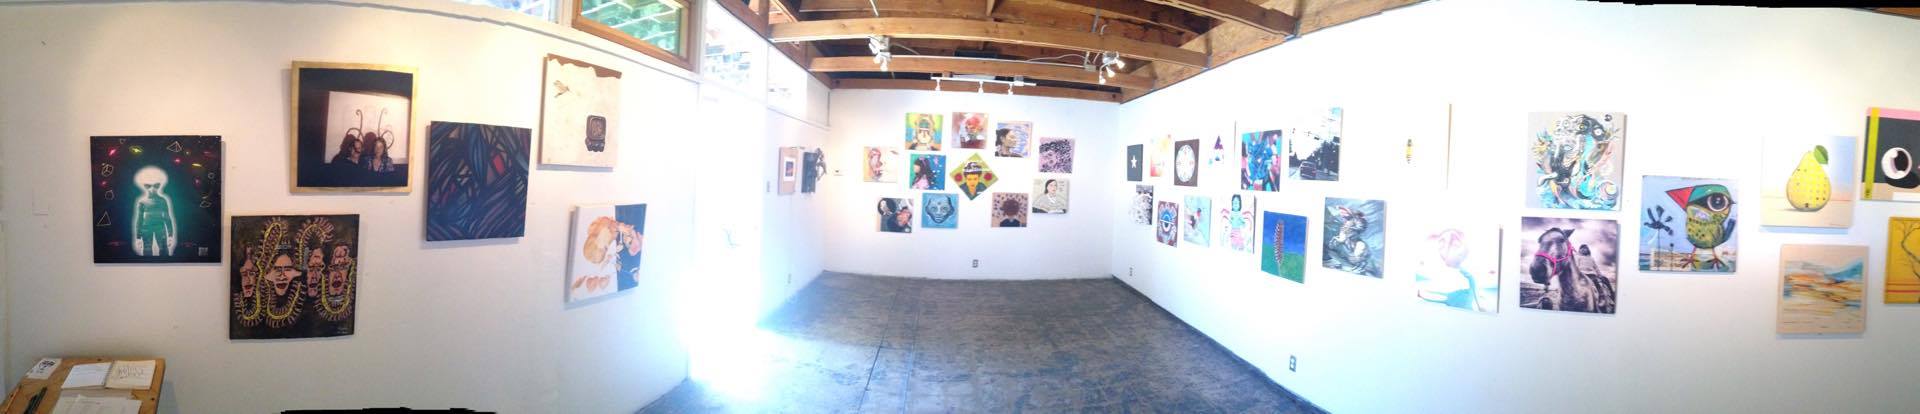 Hive gallery one